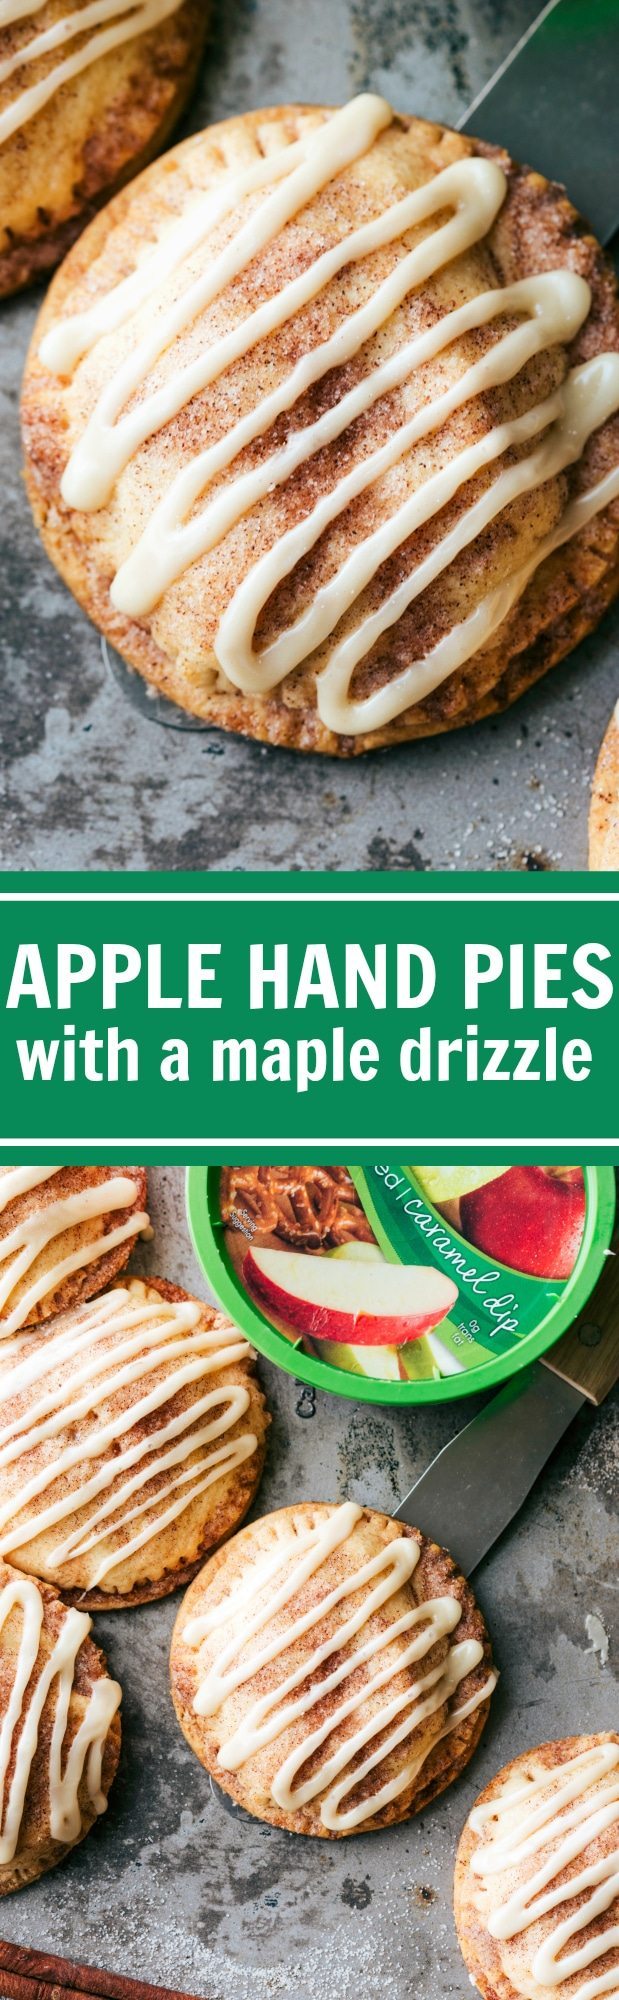 Delicious and flakey hand apple pies with an amazing maple-sugared glaze via chelseasmessyapron.com